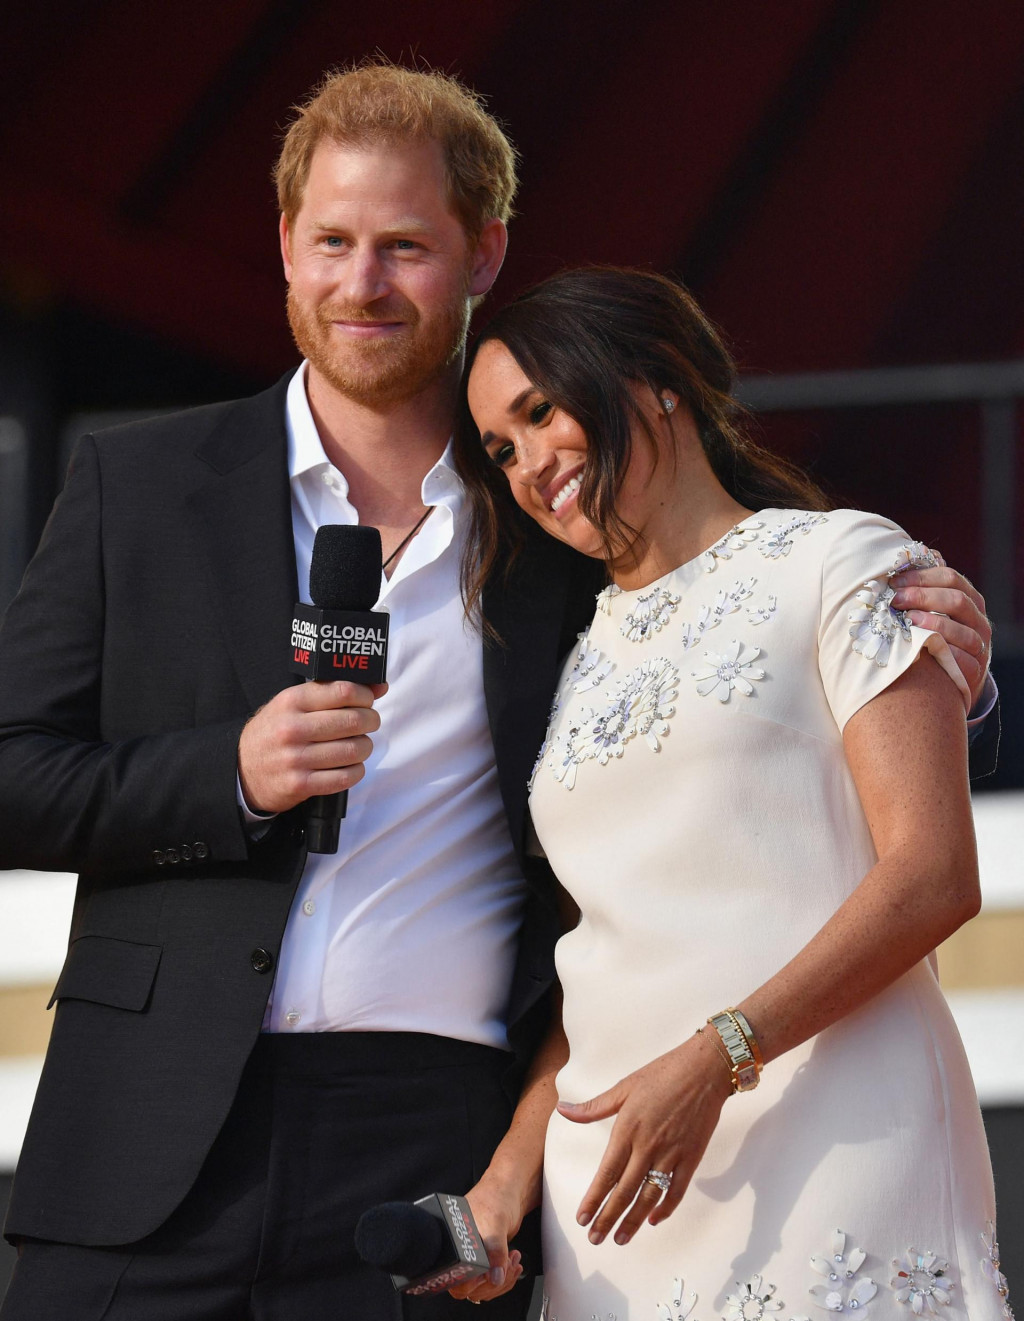 (FILES) In this file photo taken on September 25, 2021 Britain&amp;#39;s Prince Harry and Meghan Markle speak during the 2021 Global Citizen Live festival at the Great Lawn, Central Park in New York City. - Britain&amp;#39;s Prince Harry and his wife Meghan Markle have forged another business partnership on October 12, 2021-- this time in the world of finance, teaming up with an asset management company promoting socially responsible investments. (Photo by Angela Weiss/AFP)